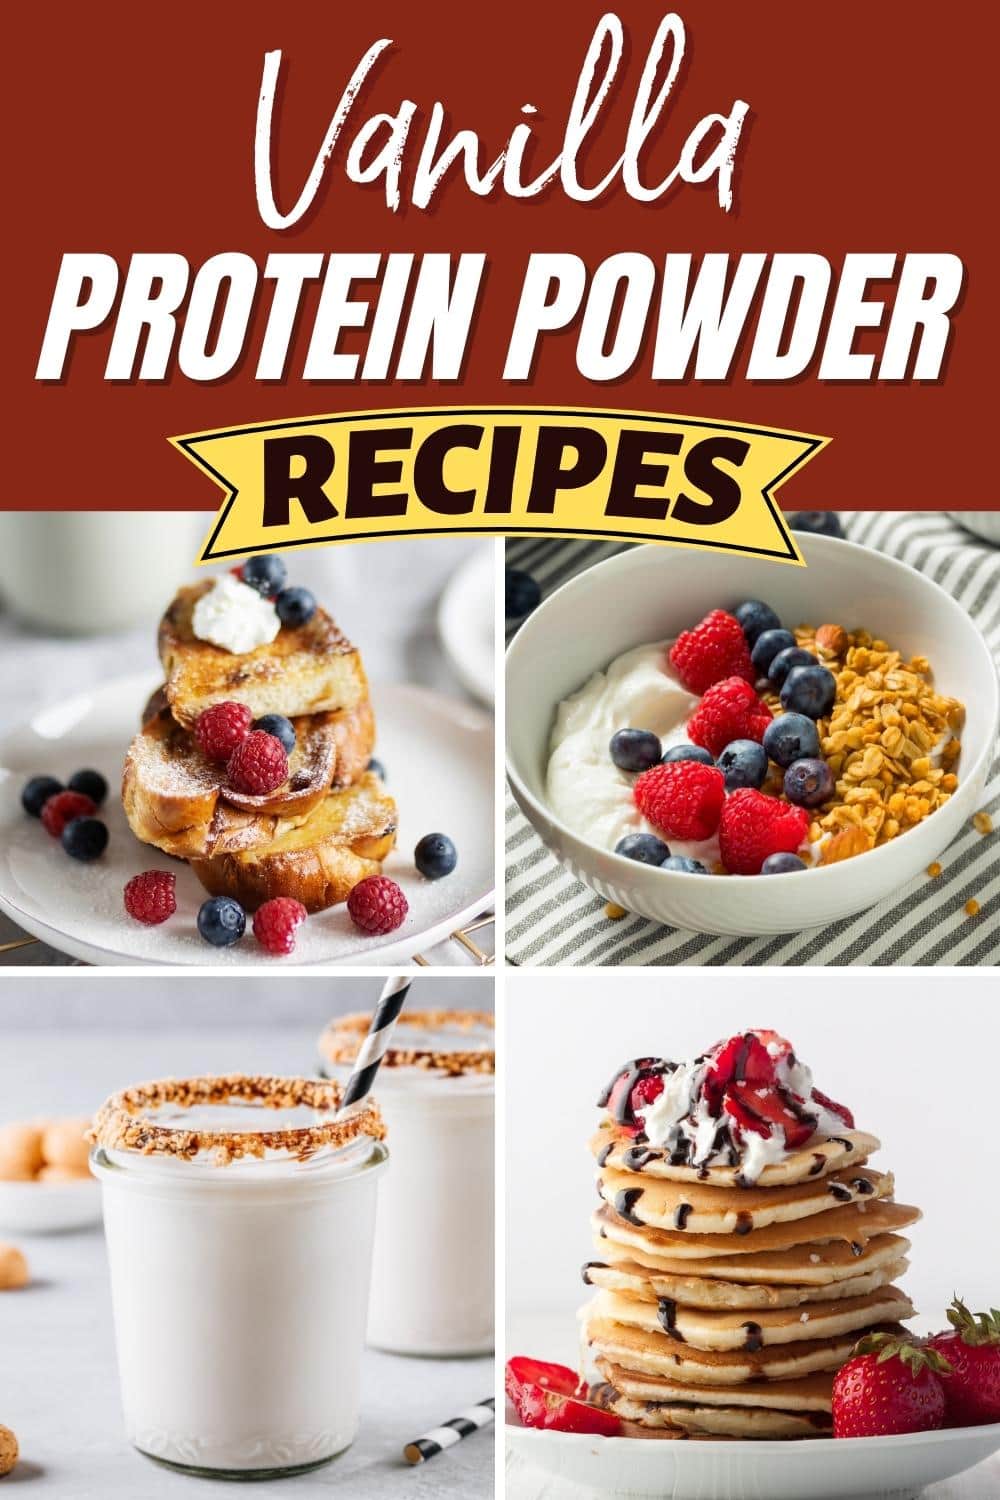 15 Best Vanilla Protein Powder Recipes to Try - Insanely Good